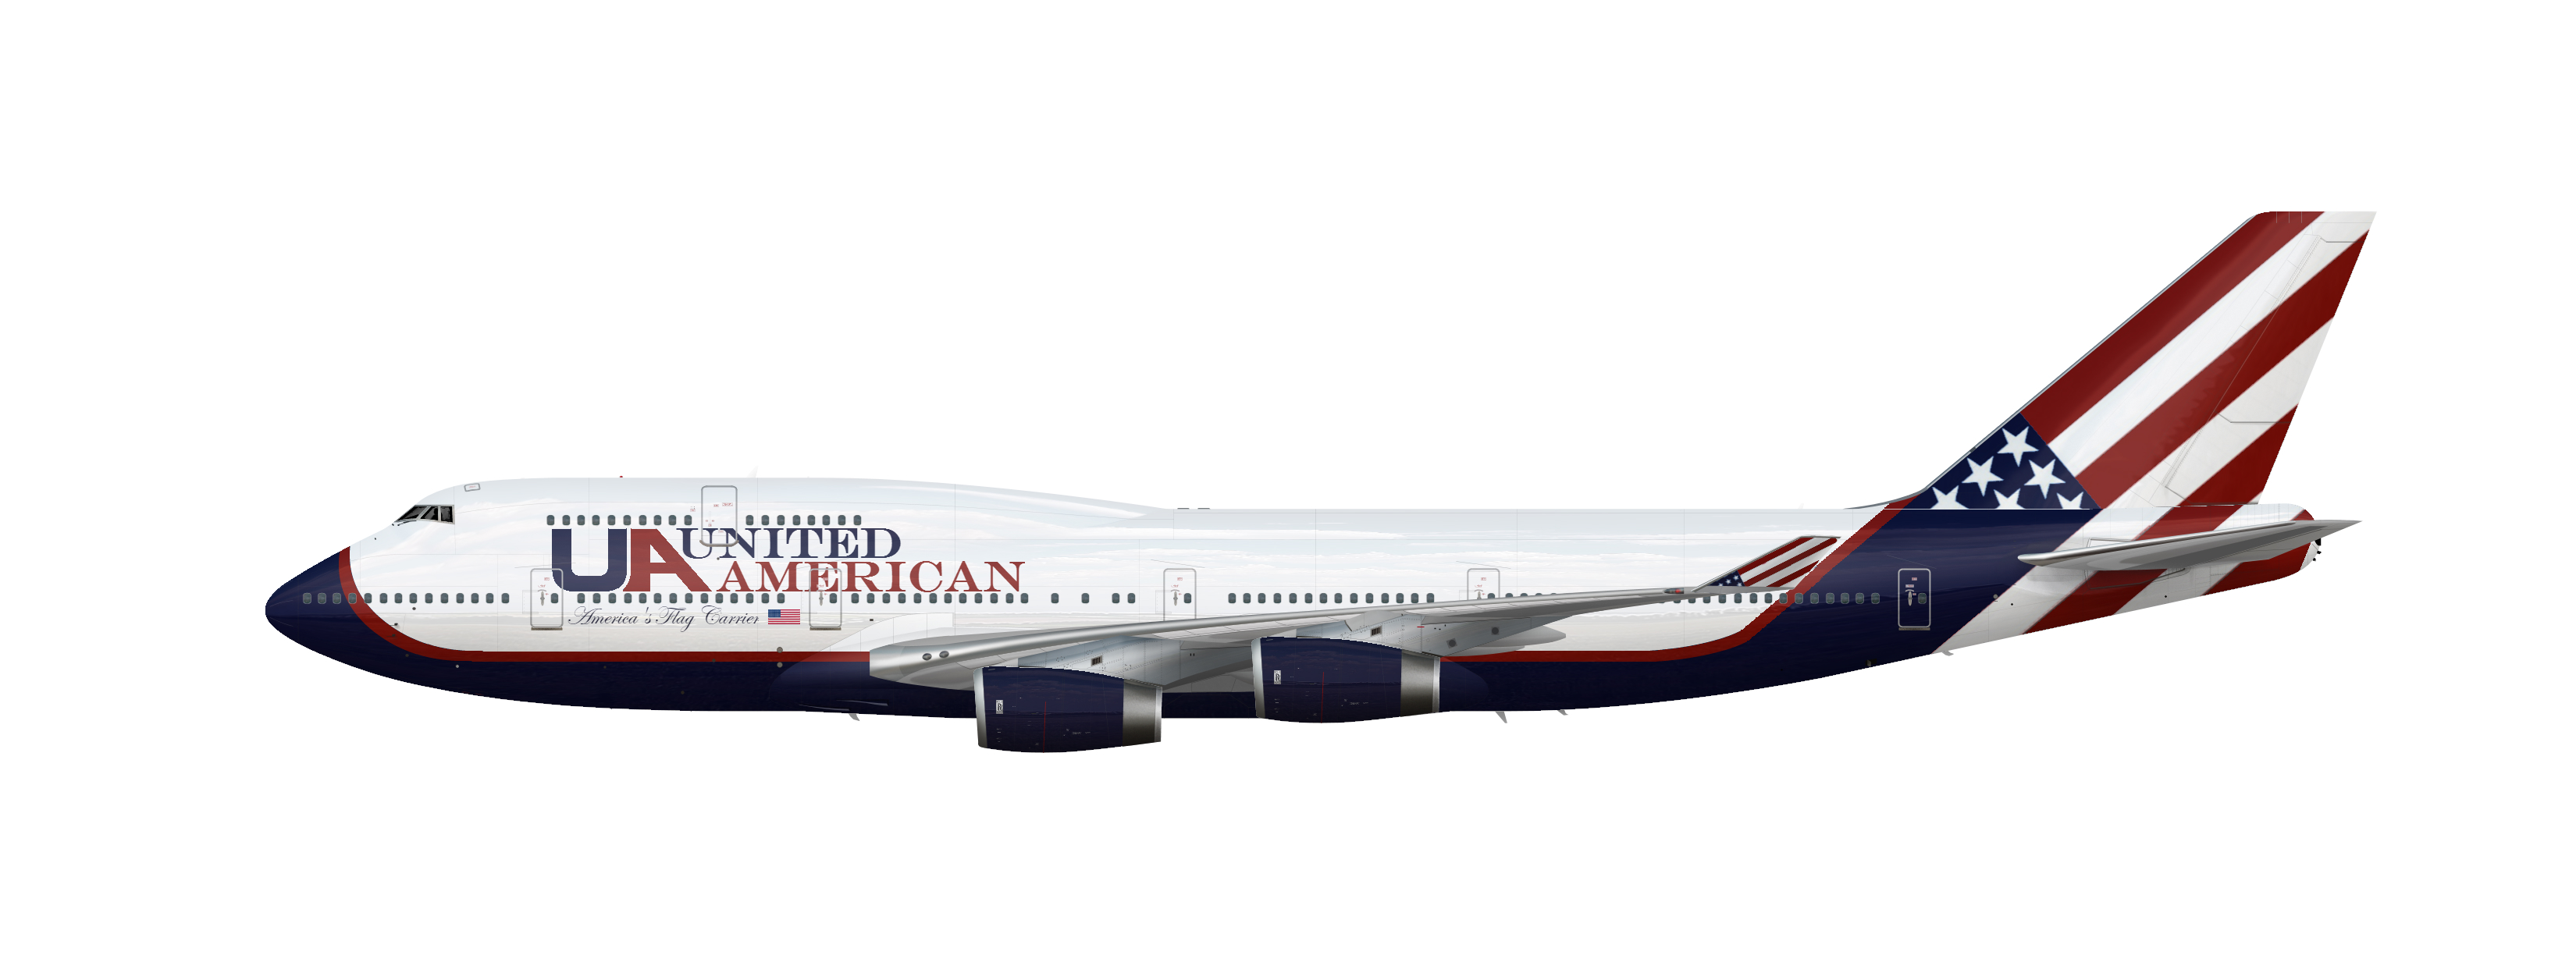 B747-400 1993-2002 - United American - Gallery - Airline Empires